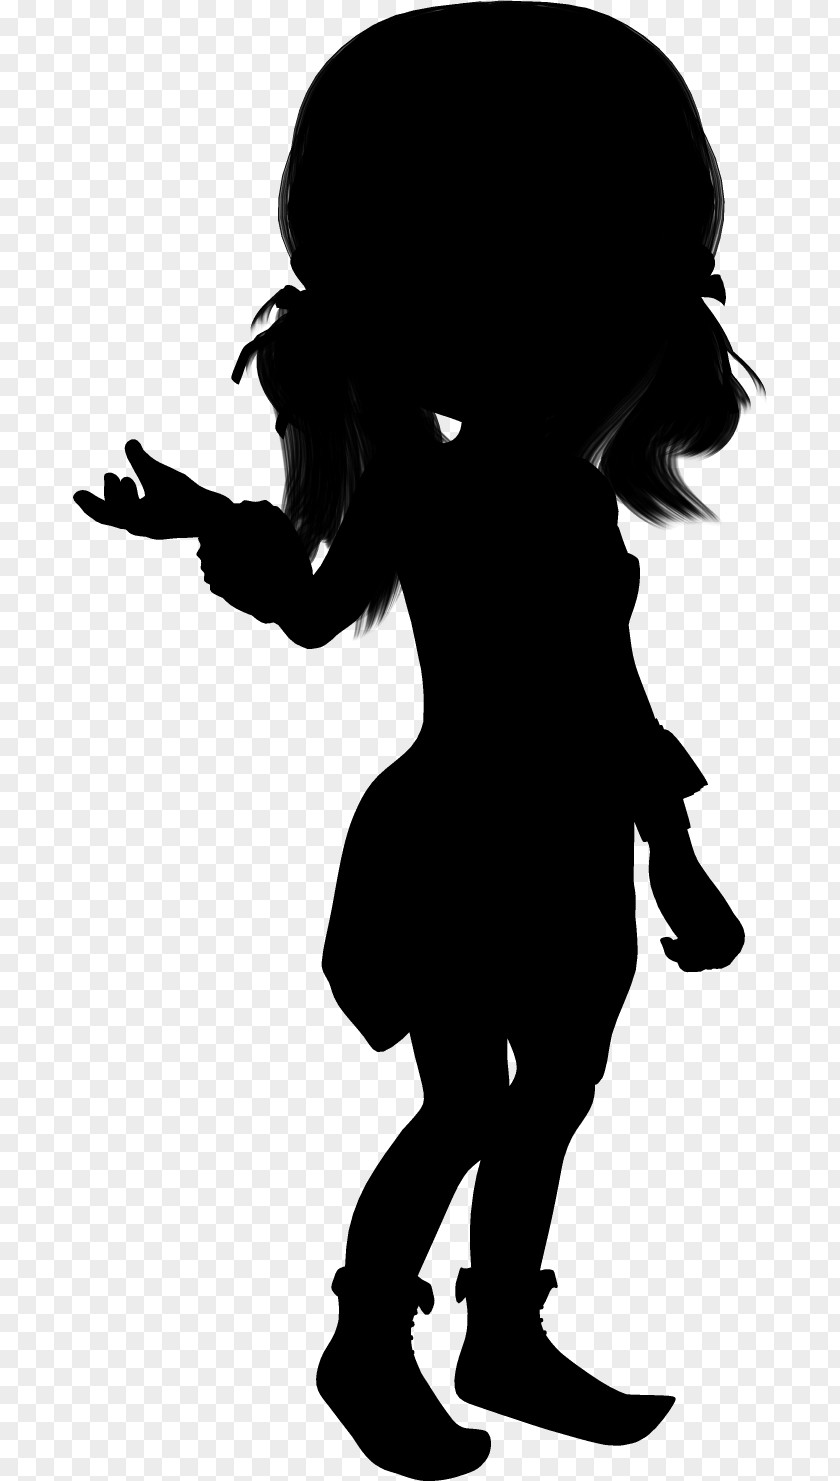 Silhouette Clip Art Illustration Image Stock.xchng PNG